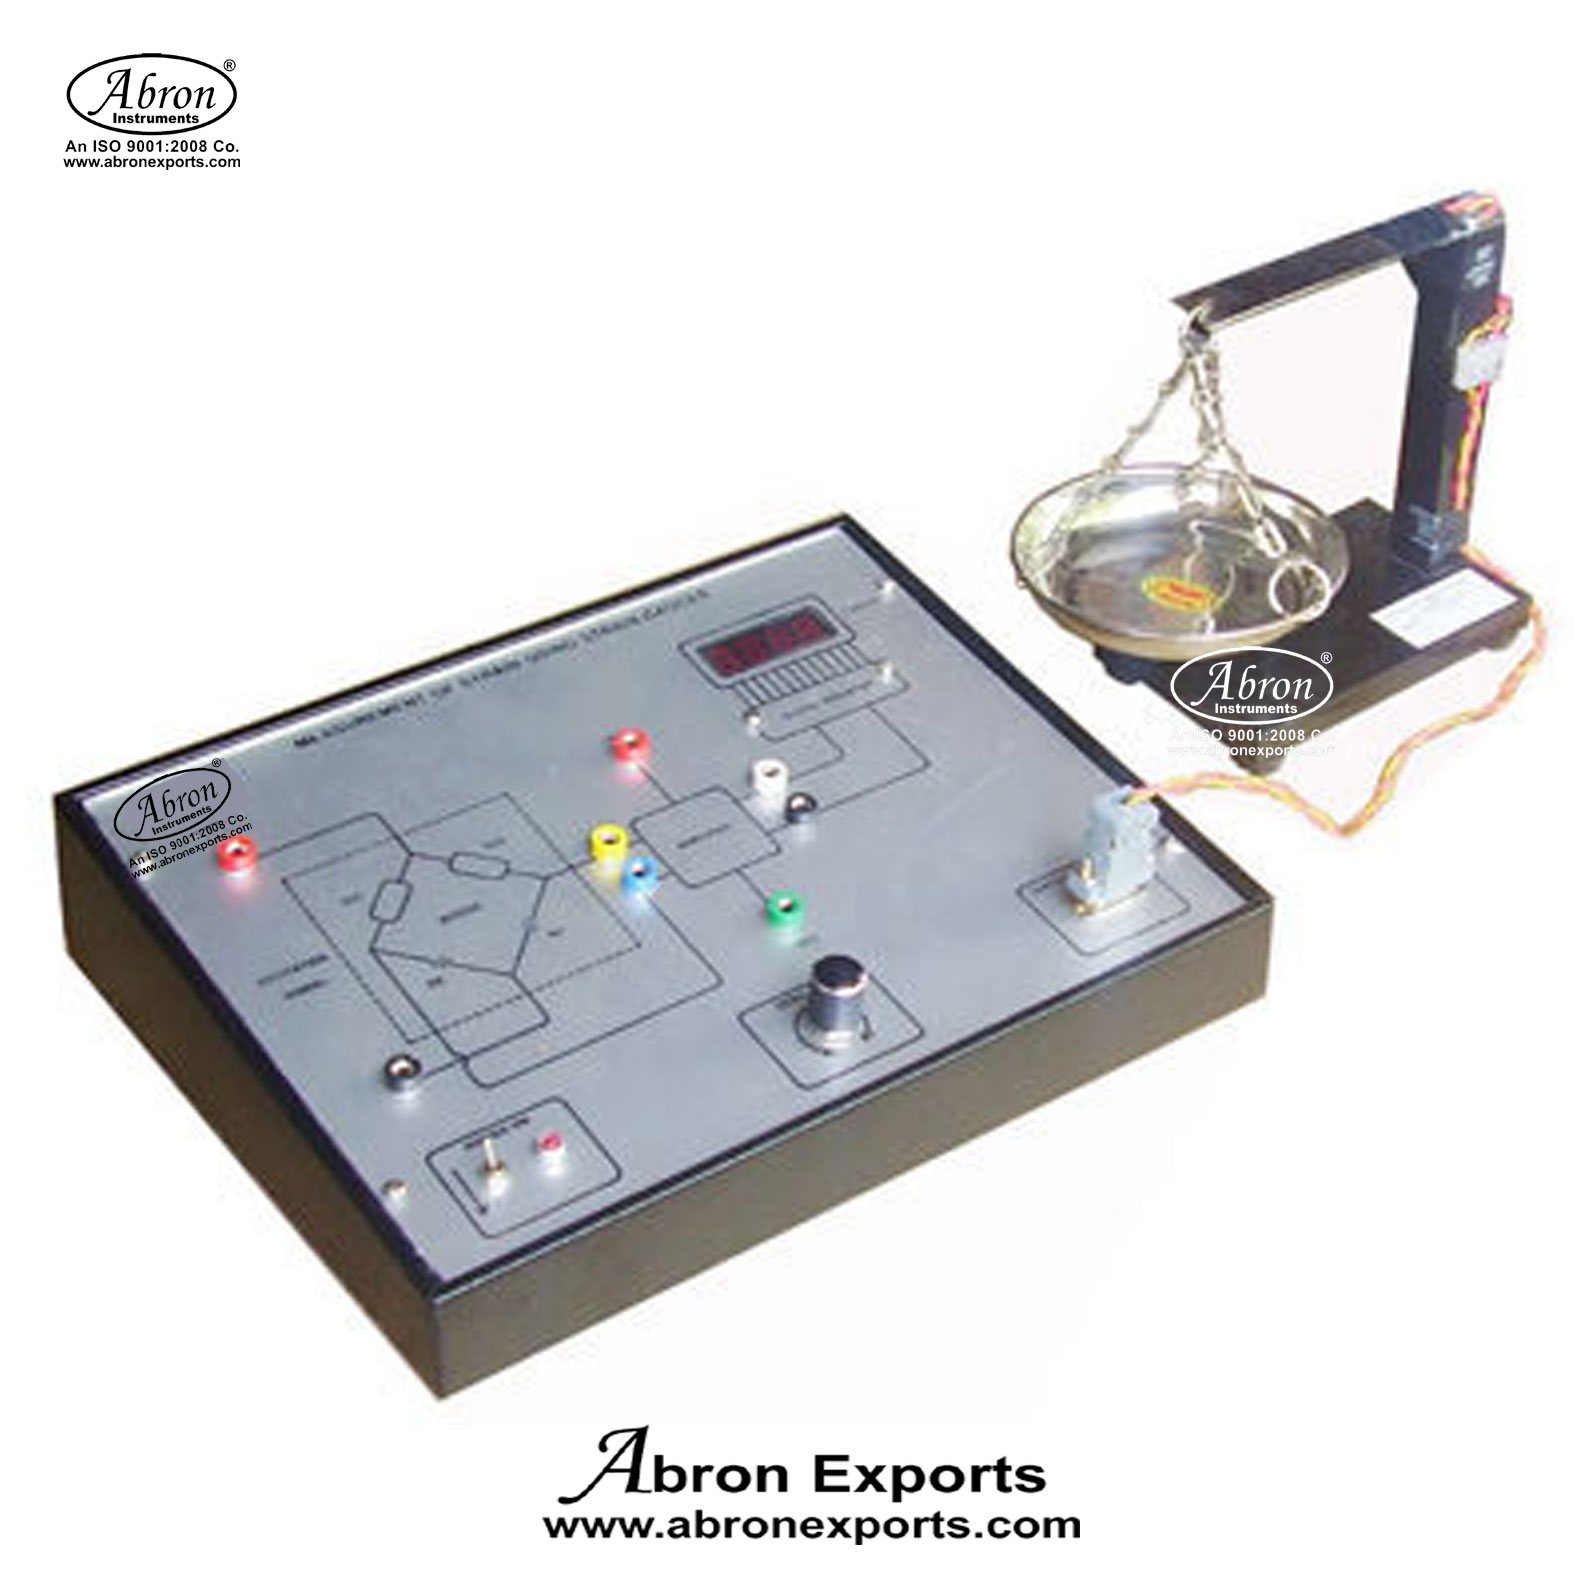 Strain Gauge Digital Trainer Abron Setup With Load Cell AE-1327STL